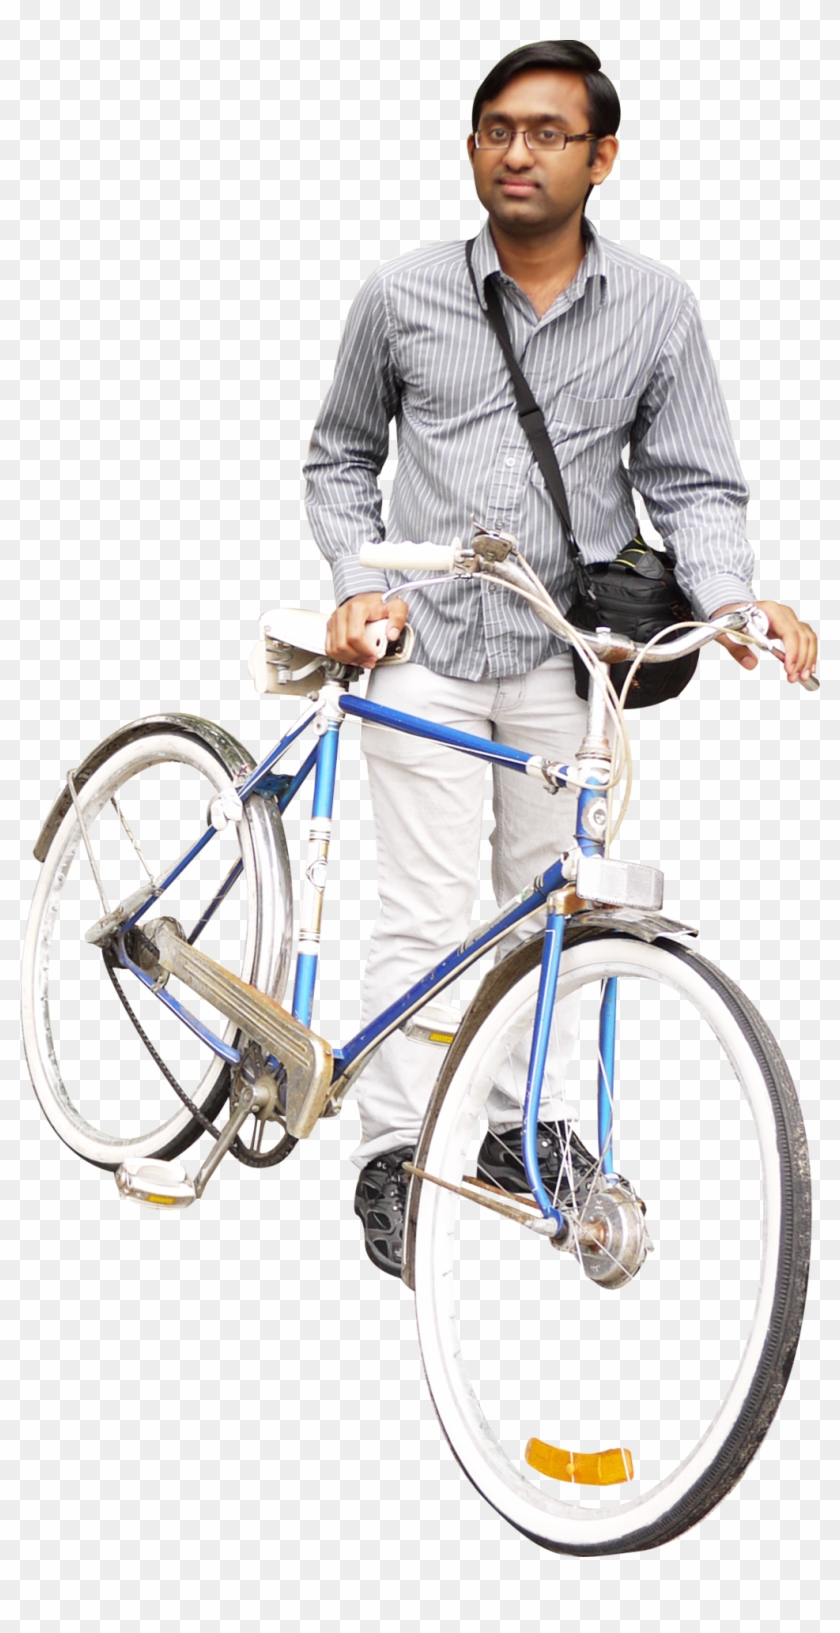 Man With Bicycle Png Image - Person With Bike Png #768562